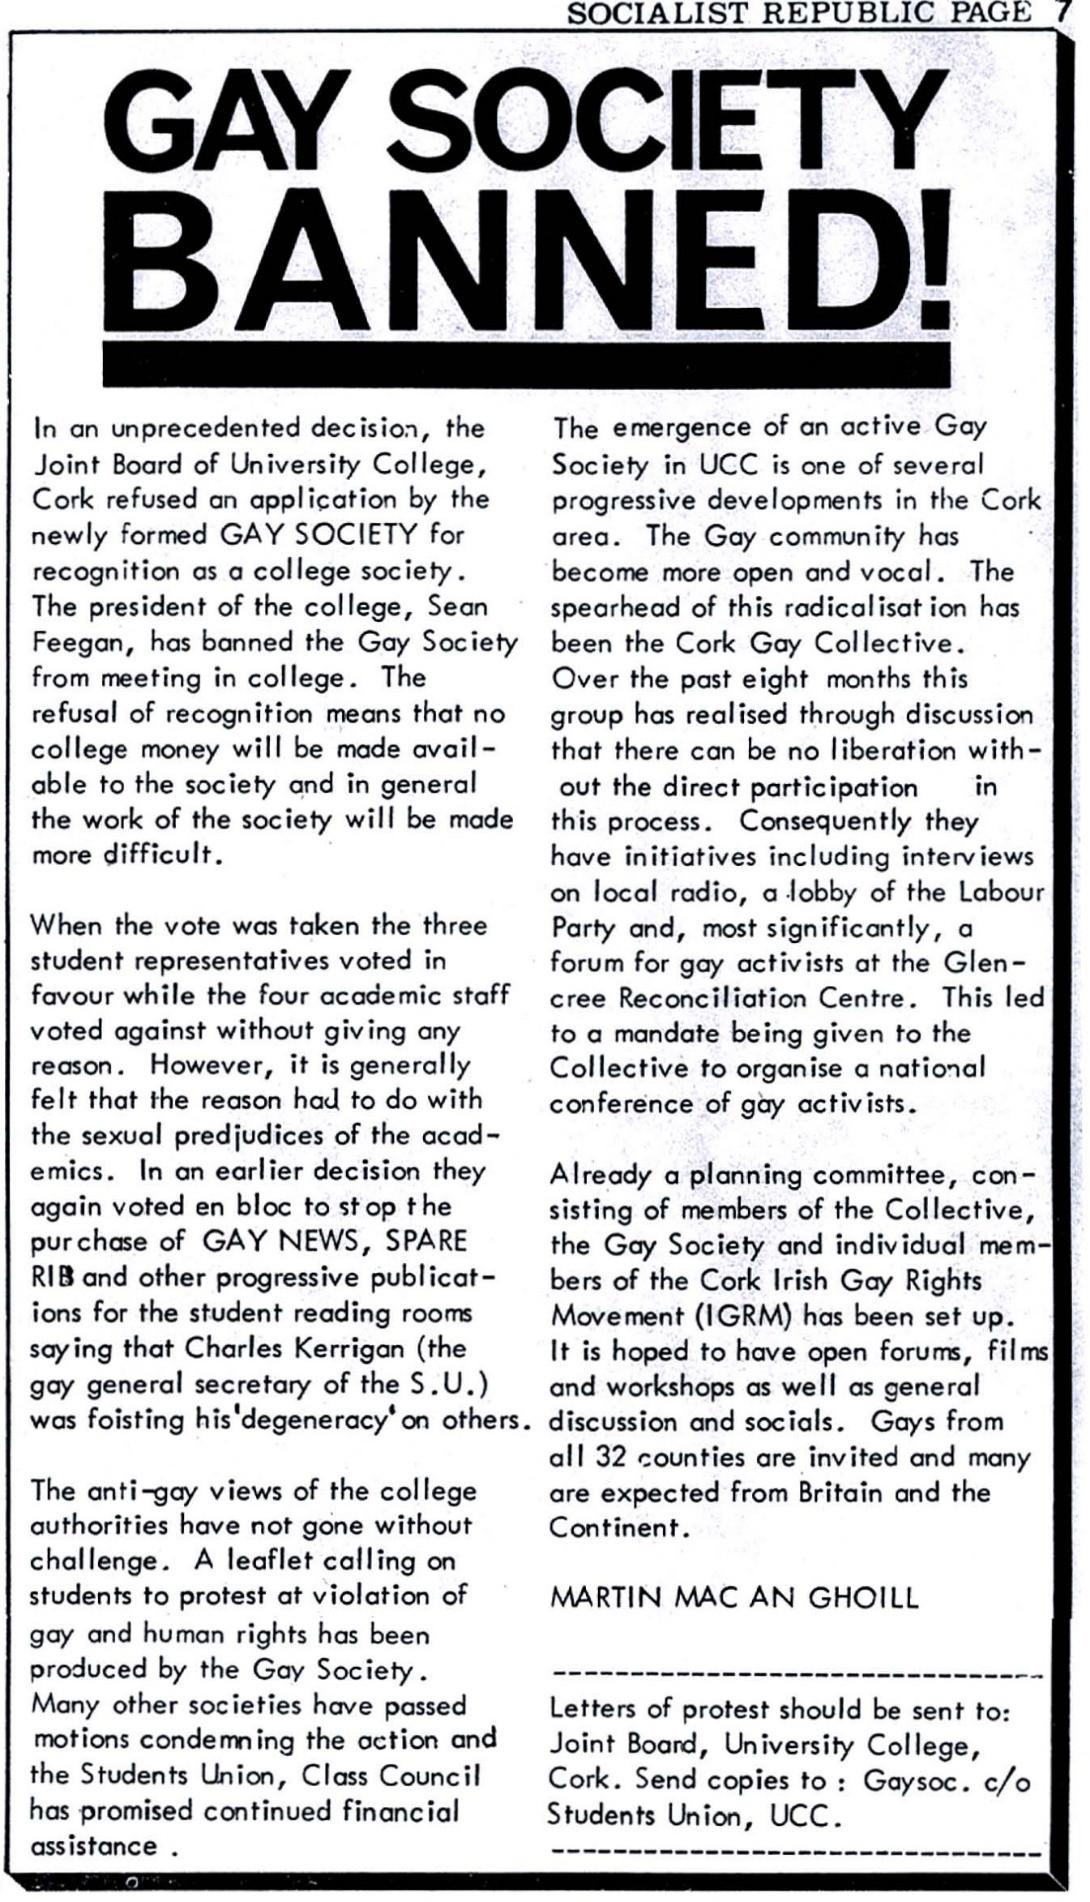 Gay Society Banned!

In an unprecedented decision, the Joint Board of University College, Cork refused an application by the newly formed GAY SOCIETY for recognition as a college society.
The president of the college, Sean Feegan, has banned the Gay Society from meeting in college. The refusal of recognition means that no college money will be made avail able to the society and in general the work of the society will be made more difficult. '

When the vote was taken the three student representatives voted in favour while the four academic staff voted against without giving any ~ reason. However, it is generally felt that the reason had to do with the sexual predjudices [sic] of the academics. In an earlier decision they again voted en bloc to stop the purchase of GAY NEWS, SPARE RIB and other progressive publications for the student reading rooms saying that Charles Kerrigan (the gay general secretary of the S.U.) was foisting his 'degeneracy' on others.

The anti-gay views of the college authorities have not gone without challenge. A leaflet calling on students to protest at violation of gay and human rights has been produced by the Gay Society.
Many other societies have passed motions condemning the action and the Students Union, Class Council has promised continued financial assistance.

The emergence of an active Gay ,l Society in UCC is one of several progressive developments in the Cork area. The Gay community has become more open and vocal. The spearhead of this radicalisation has been the Cork Gay Collective.
Over the past eight months this group has realised through discussion that there can be no liberation without the direct participation in this process. Consequently they have initiatives including interviews on local radio, a lobby of the Labour Party and, most significantly, a forum for gay activists at the Glencree Reconciliation Centre. This led to a mandate being given to the Collective to organise a national conference of gay activists.

Already a planning committee, consisting of members of the Collective, the Gay Society and individual members of the Cork Irish Gay Rights Movement (IGRM) has been set up. It is hoped to have open forums, films and workshops as well as general discussion and socials. Gays from all 32 counties are invited and many are expected from Britain and the Continent.

Martin Mac An Ghoill

---

Letters of protest should be sent to: Joint Board, University College, Cork. Send copies to : Gaysoc. c/o Students Union, UCC.